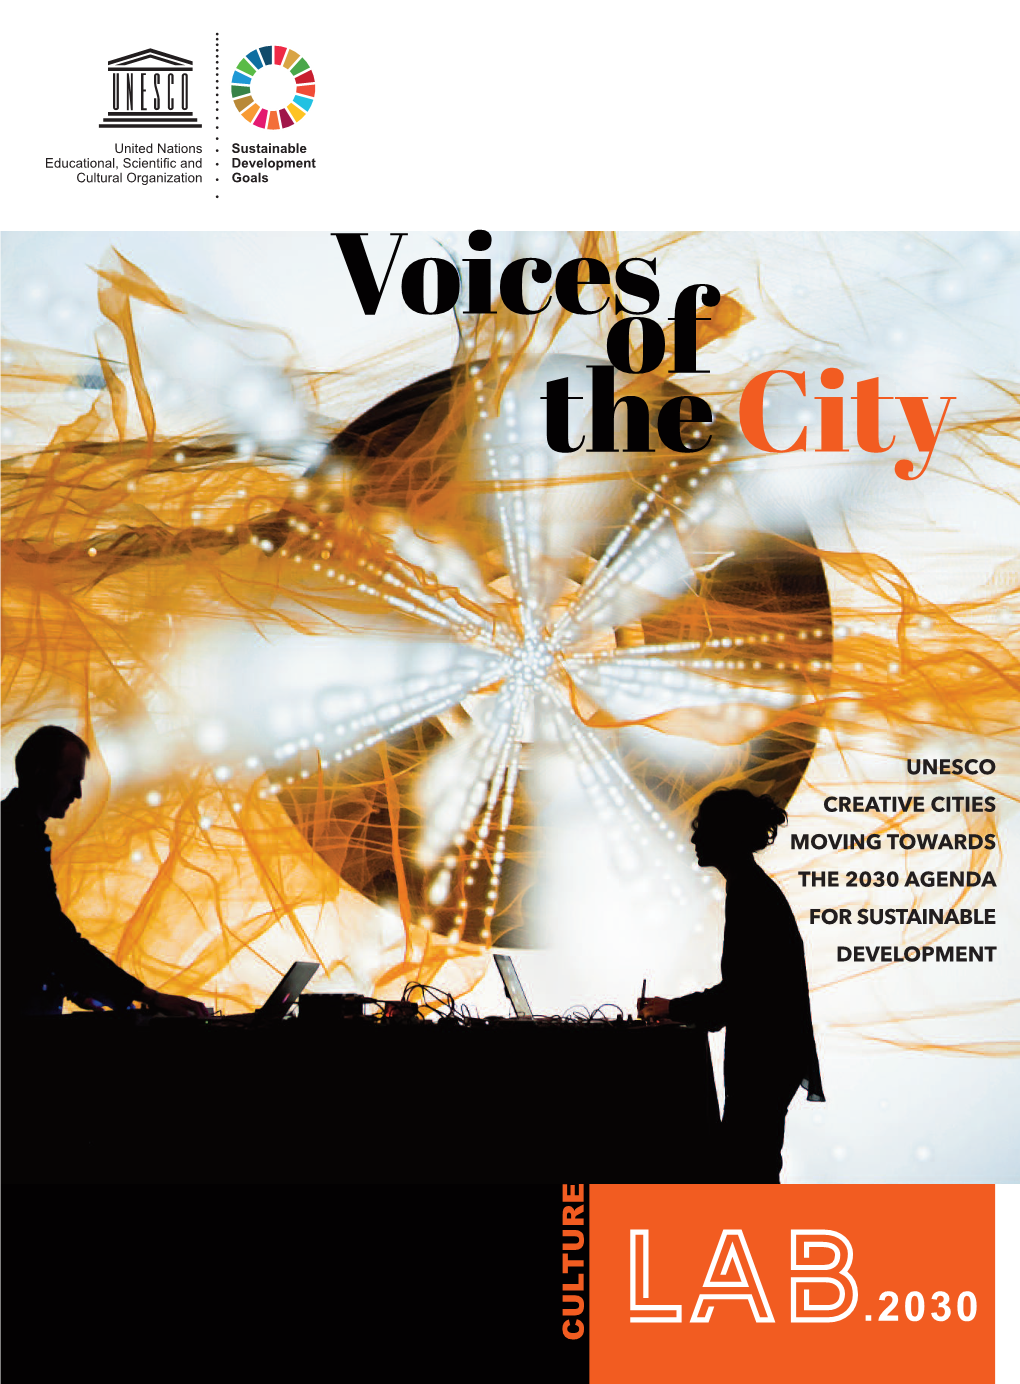 Voices of the City Voice